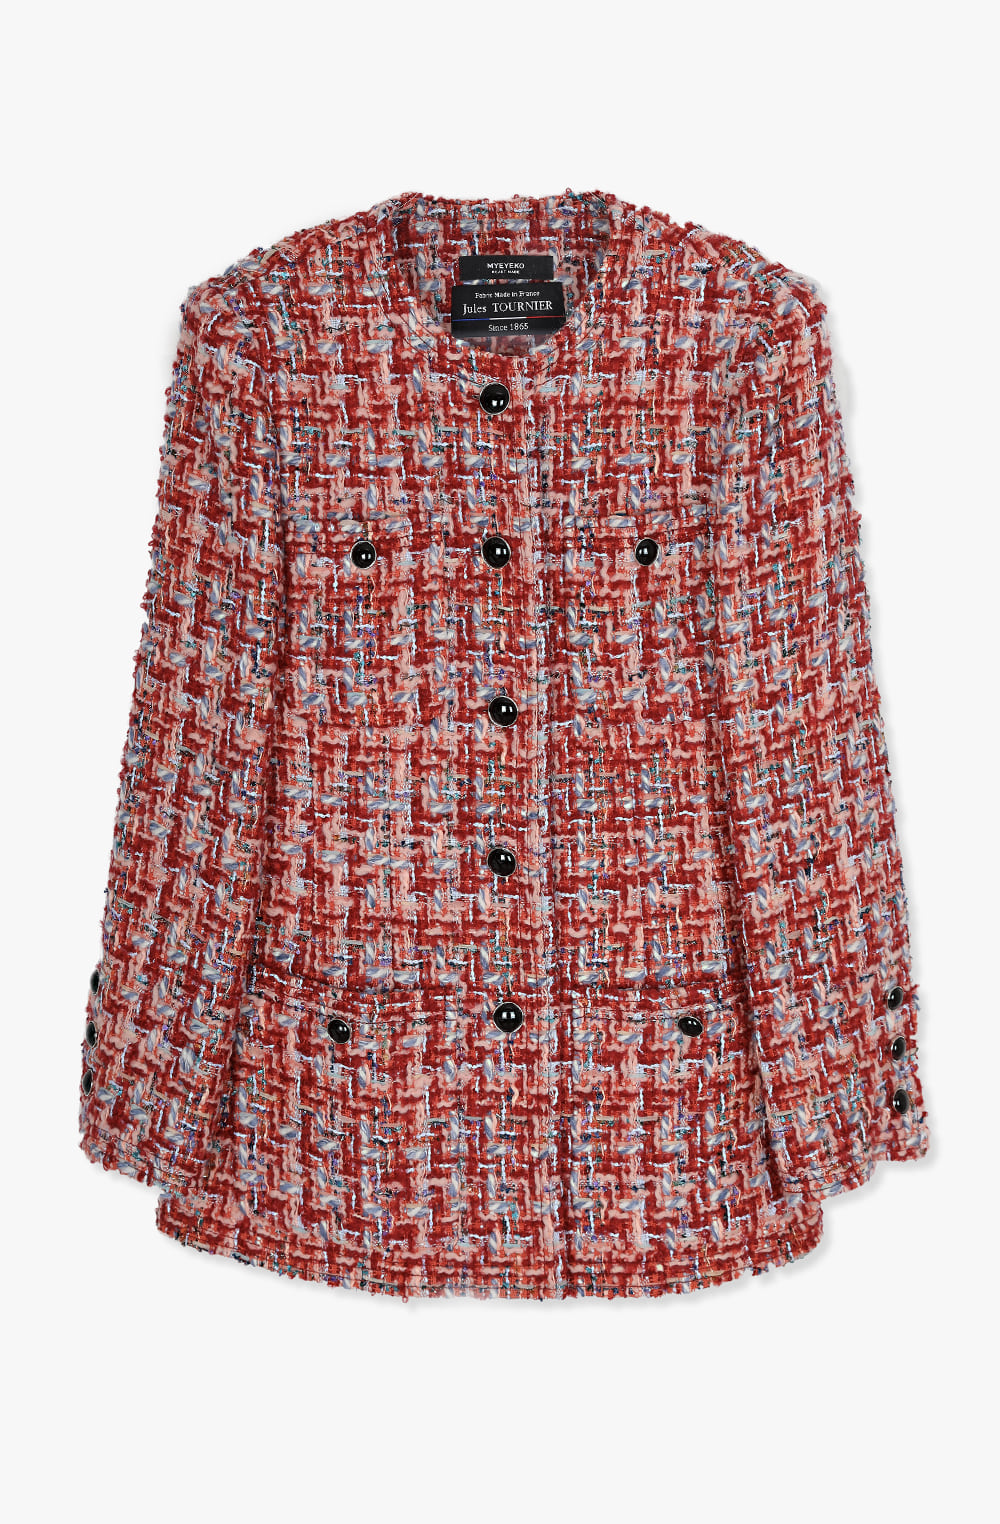 HIGH QUALITY LINE - MYEYEKO 22 CLASSIC TWEED JACKET &quot;Jules TOURNIER&quot; (Fabric By. Made in France)